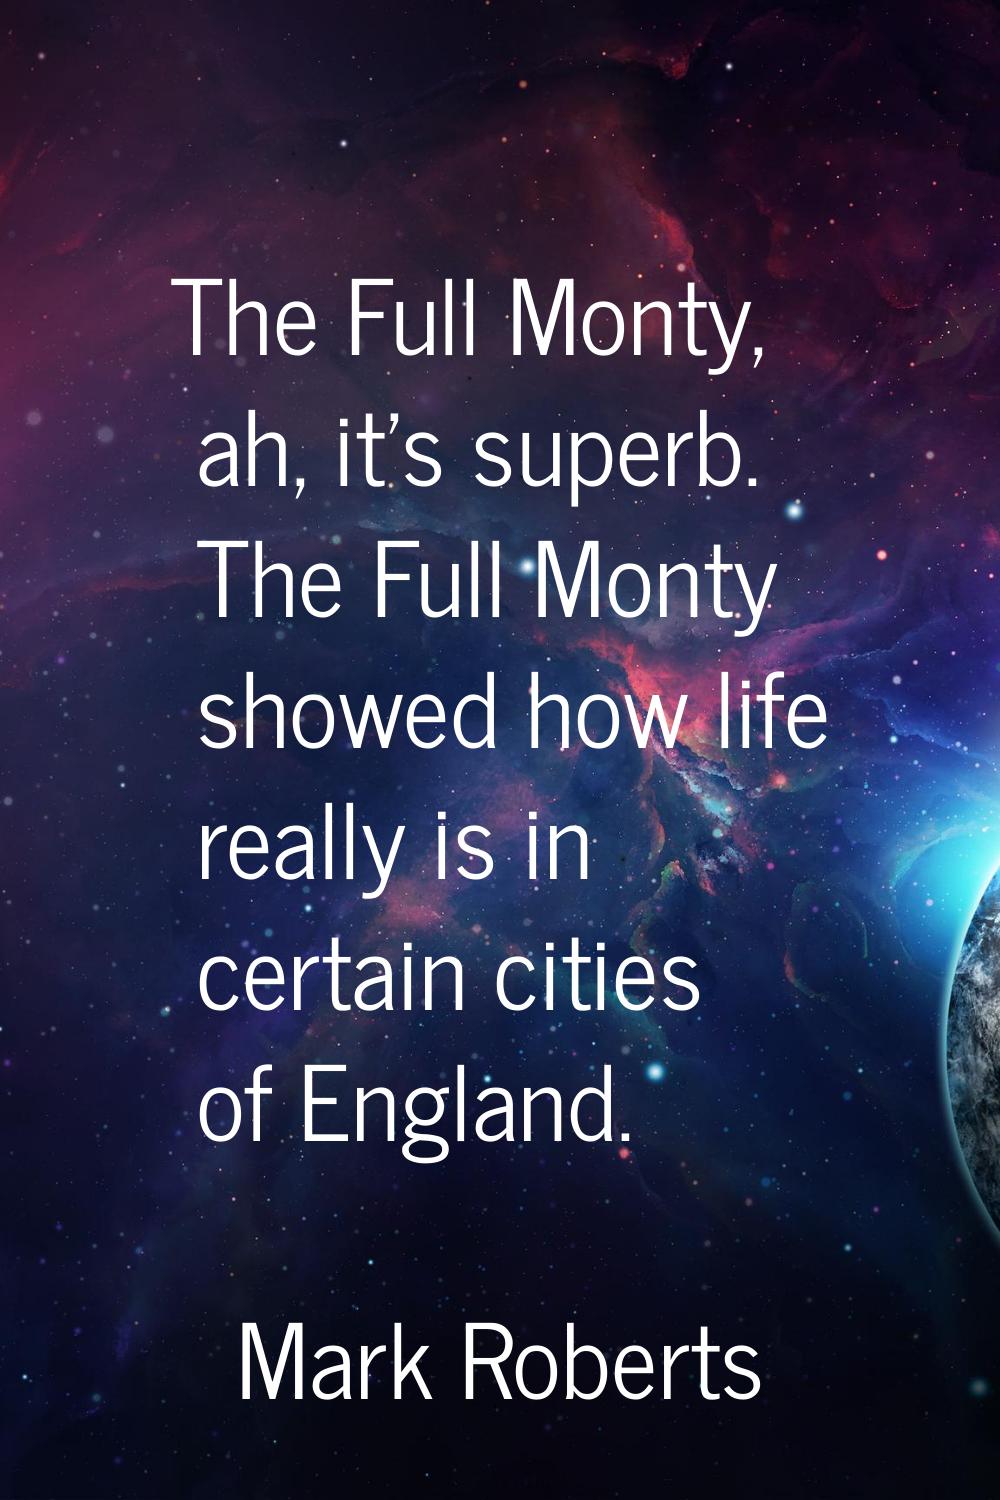 The Full Monty, ah, it's superb. The Full Monty showed how life really is in certain cities of Engl